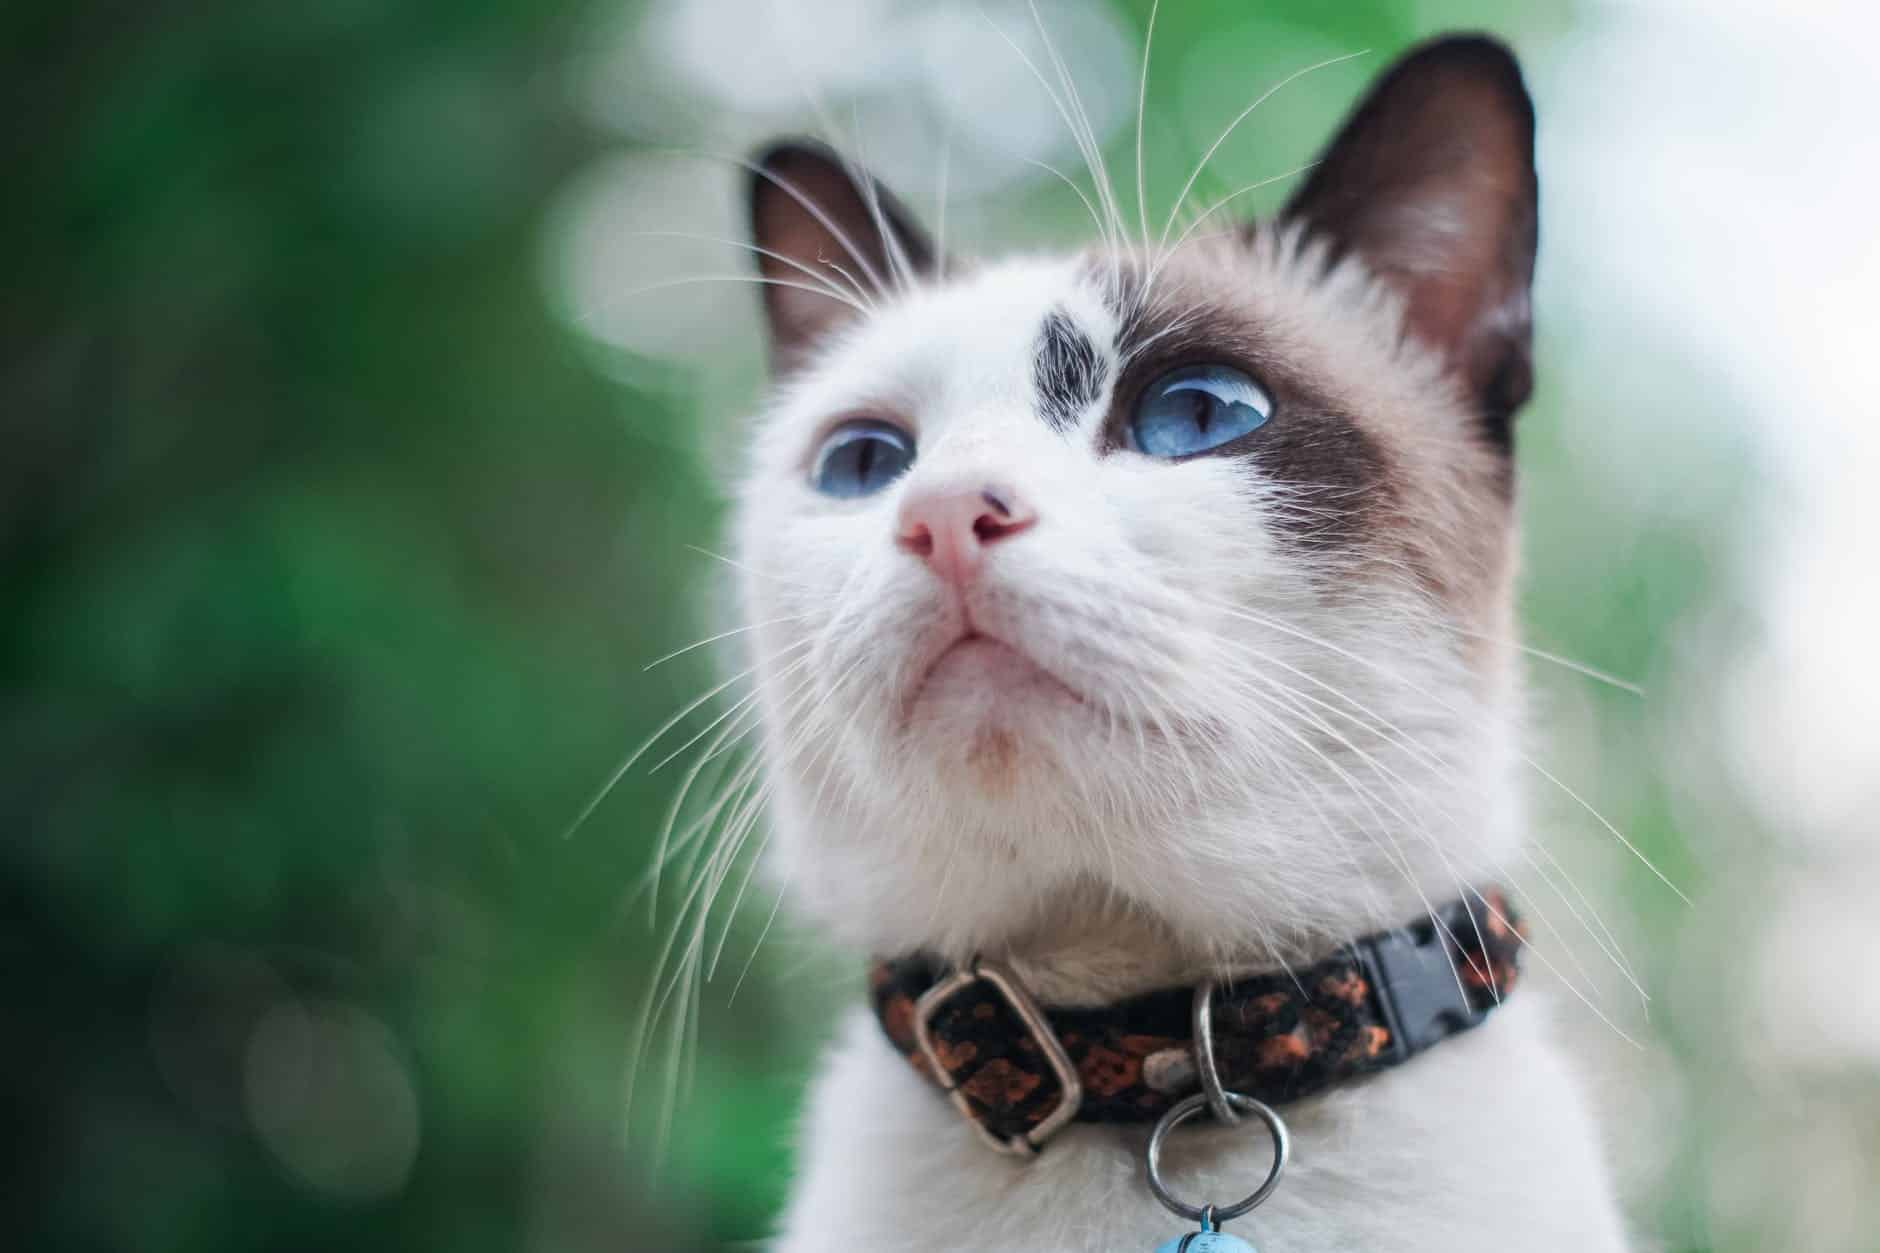 This cat is wearing a breakaway cat collar - these cat collars are the safest for cats.